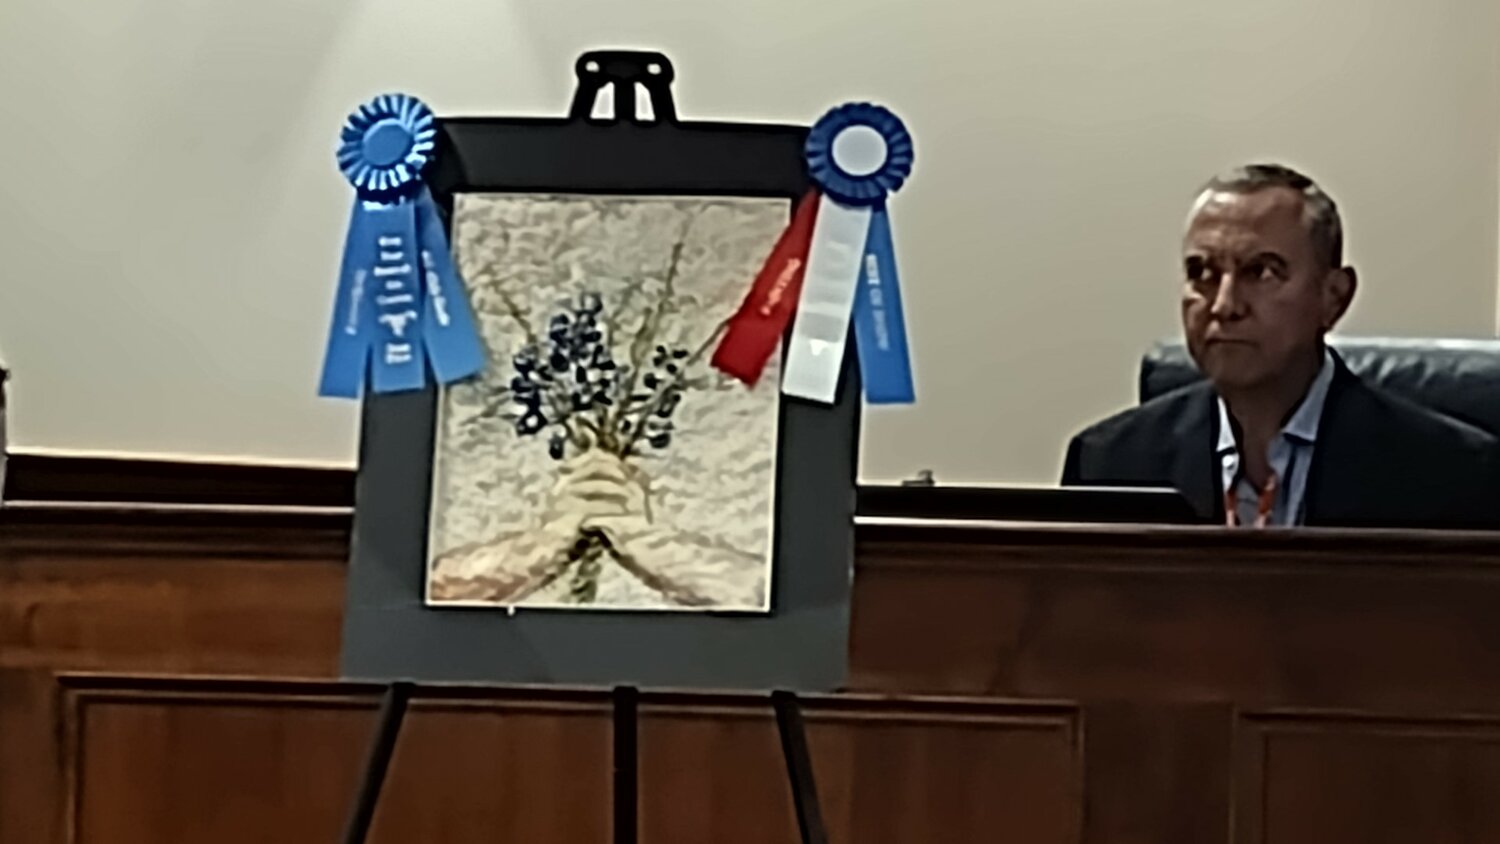 Elsherbiny’s work was on display at City Hall at Monday night's council meeting.